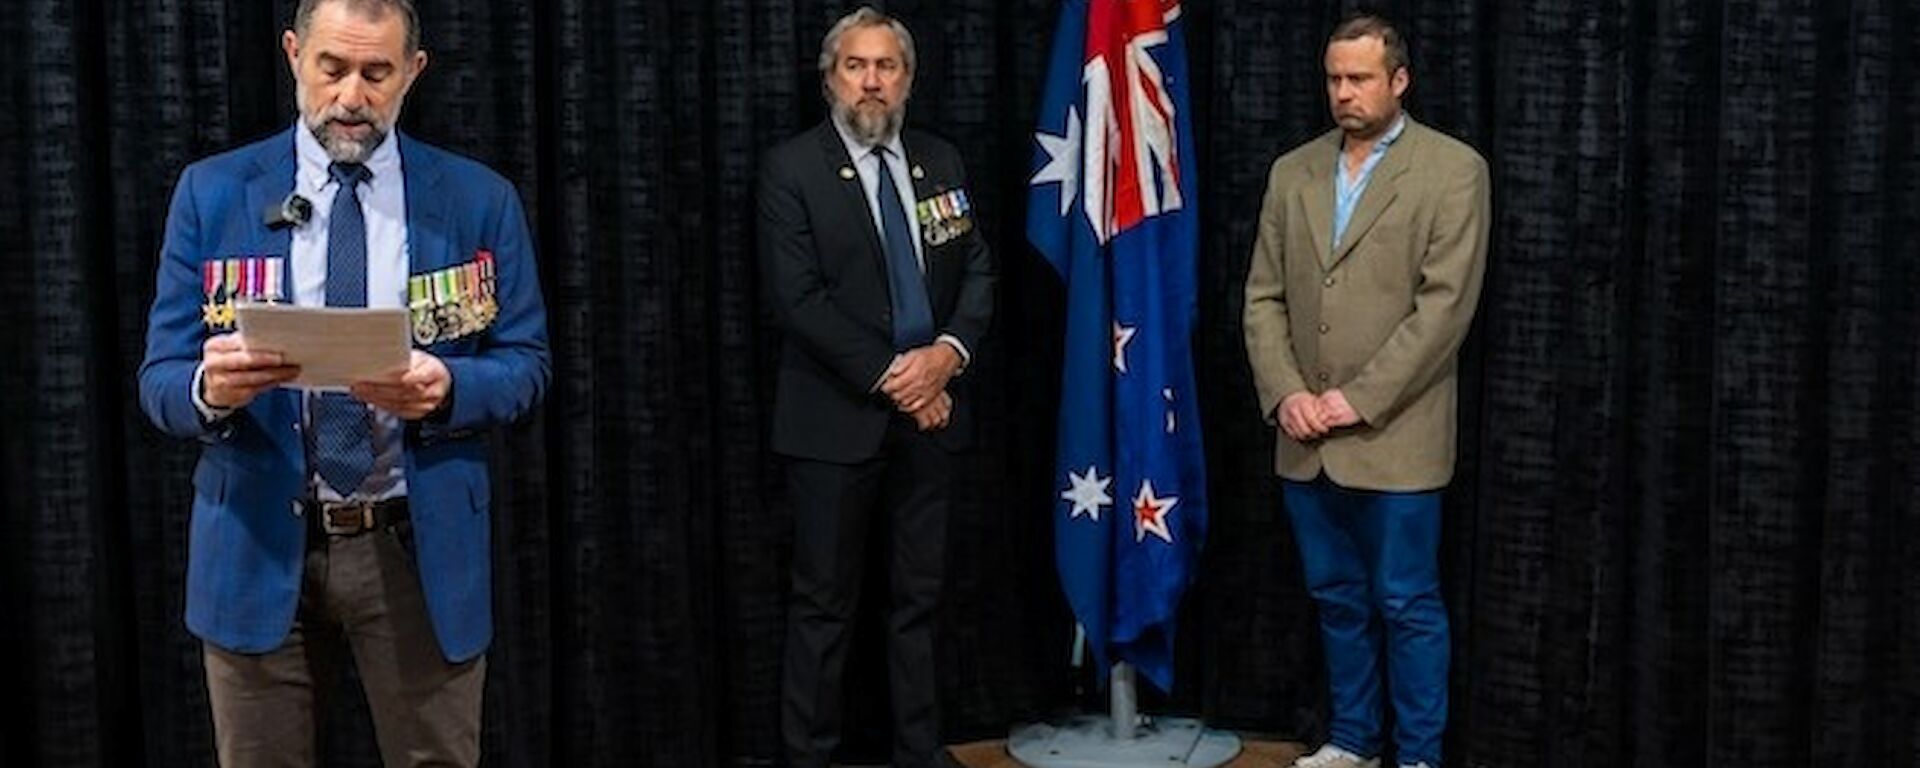 Two men stand on either side of an indoor flagpole bearing the Australian and New Zealand flags. A man with military medals on his jacket stands in front of them, reading aloud from a programme